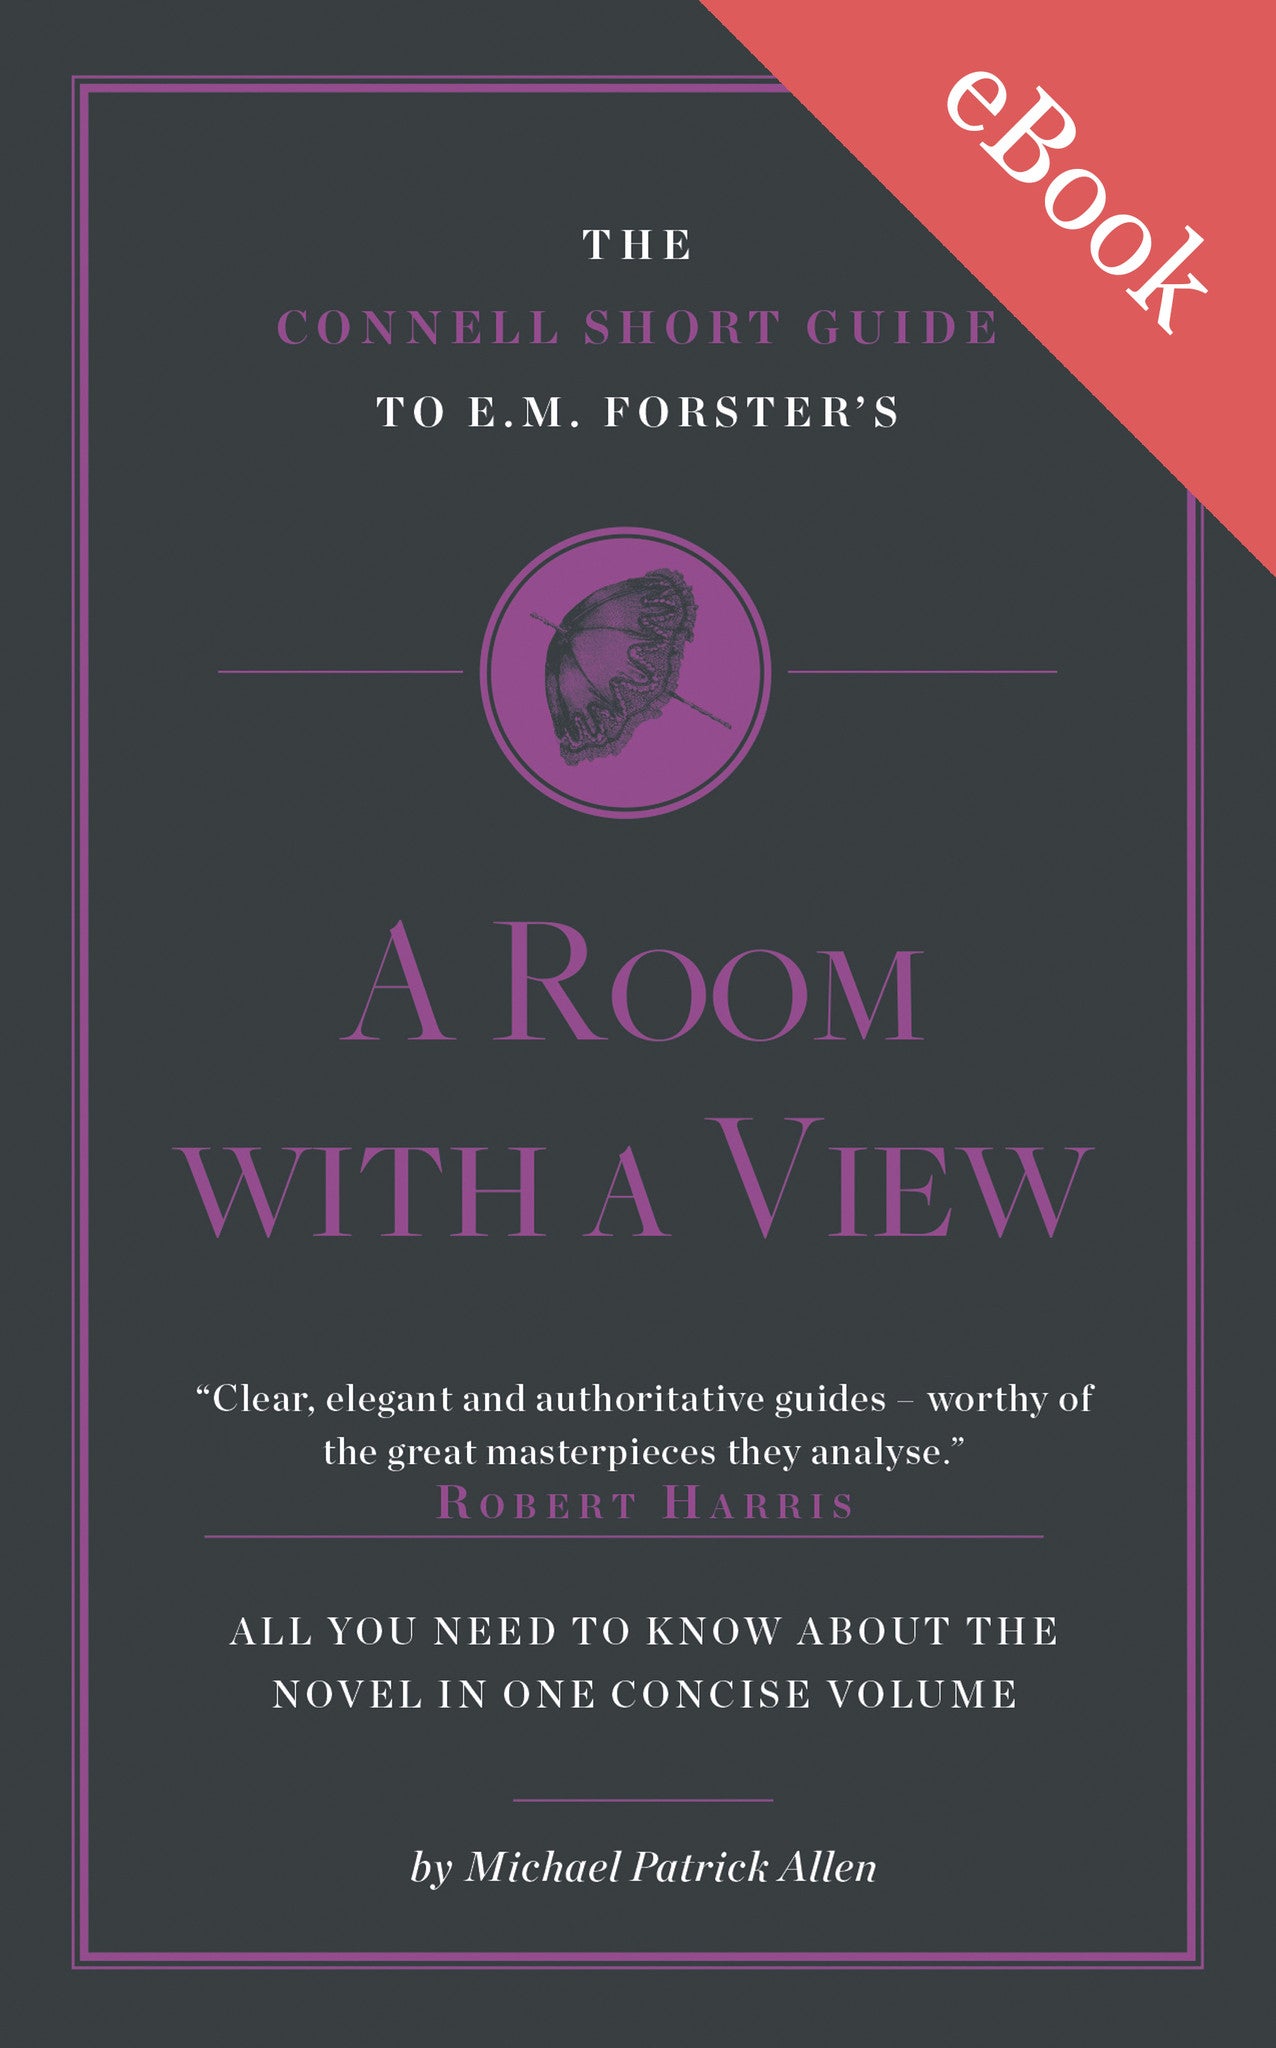 E. M. Forster's A Room with a View